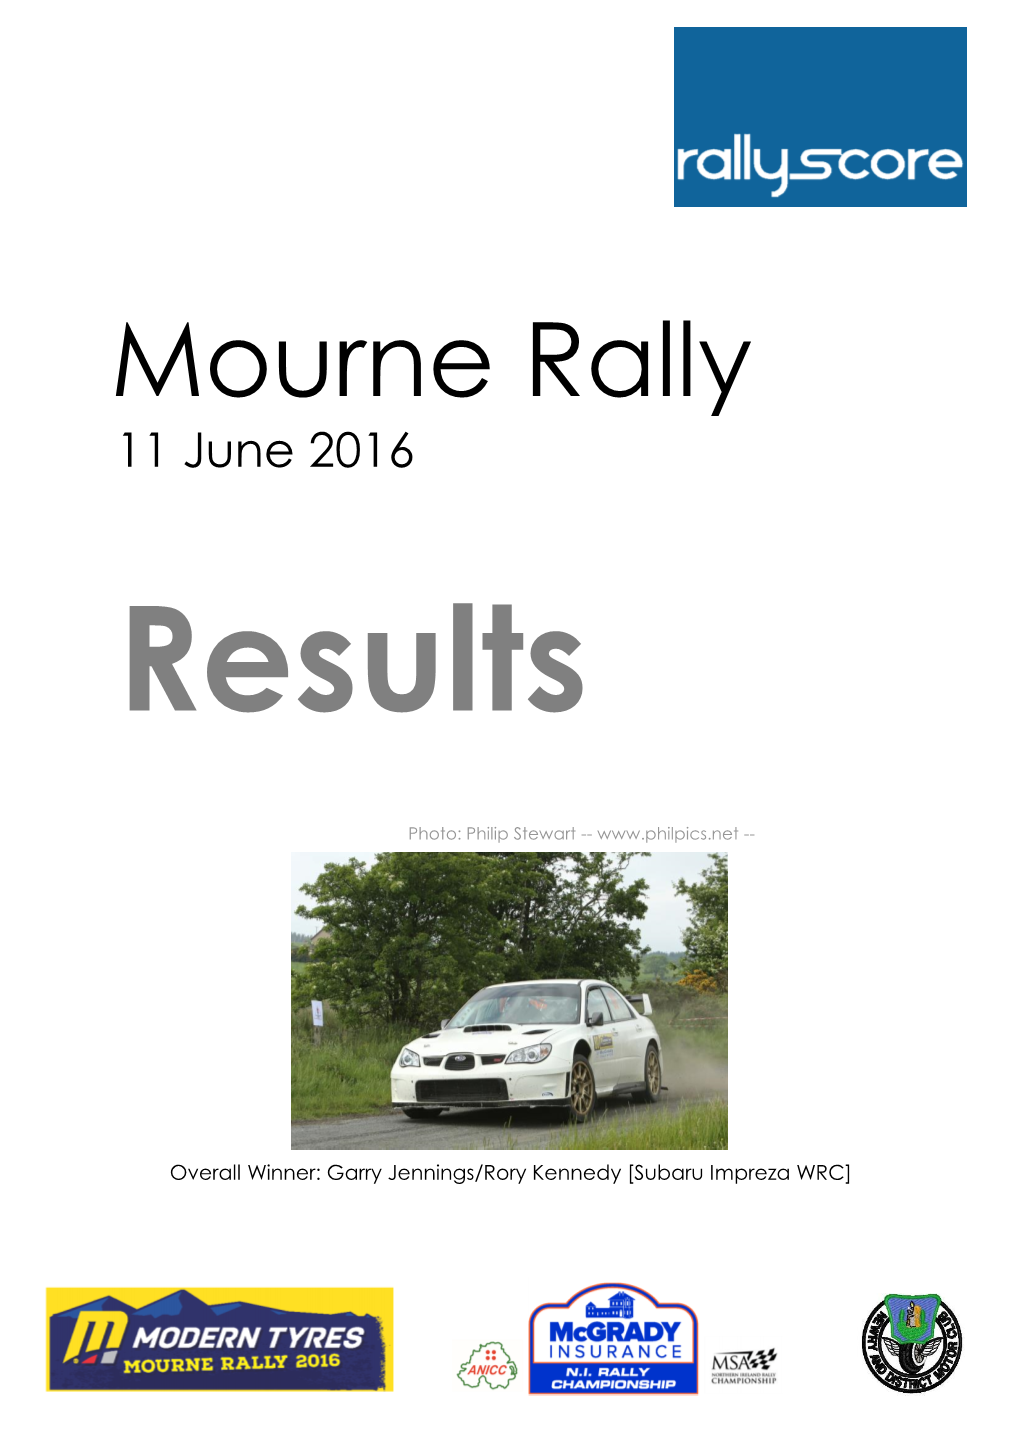 Mourne Rally 2016 Results